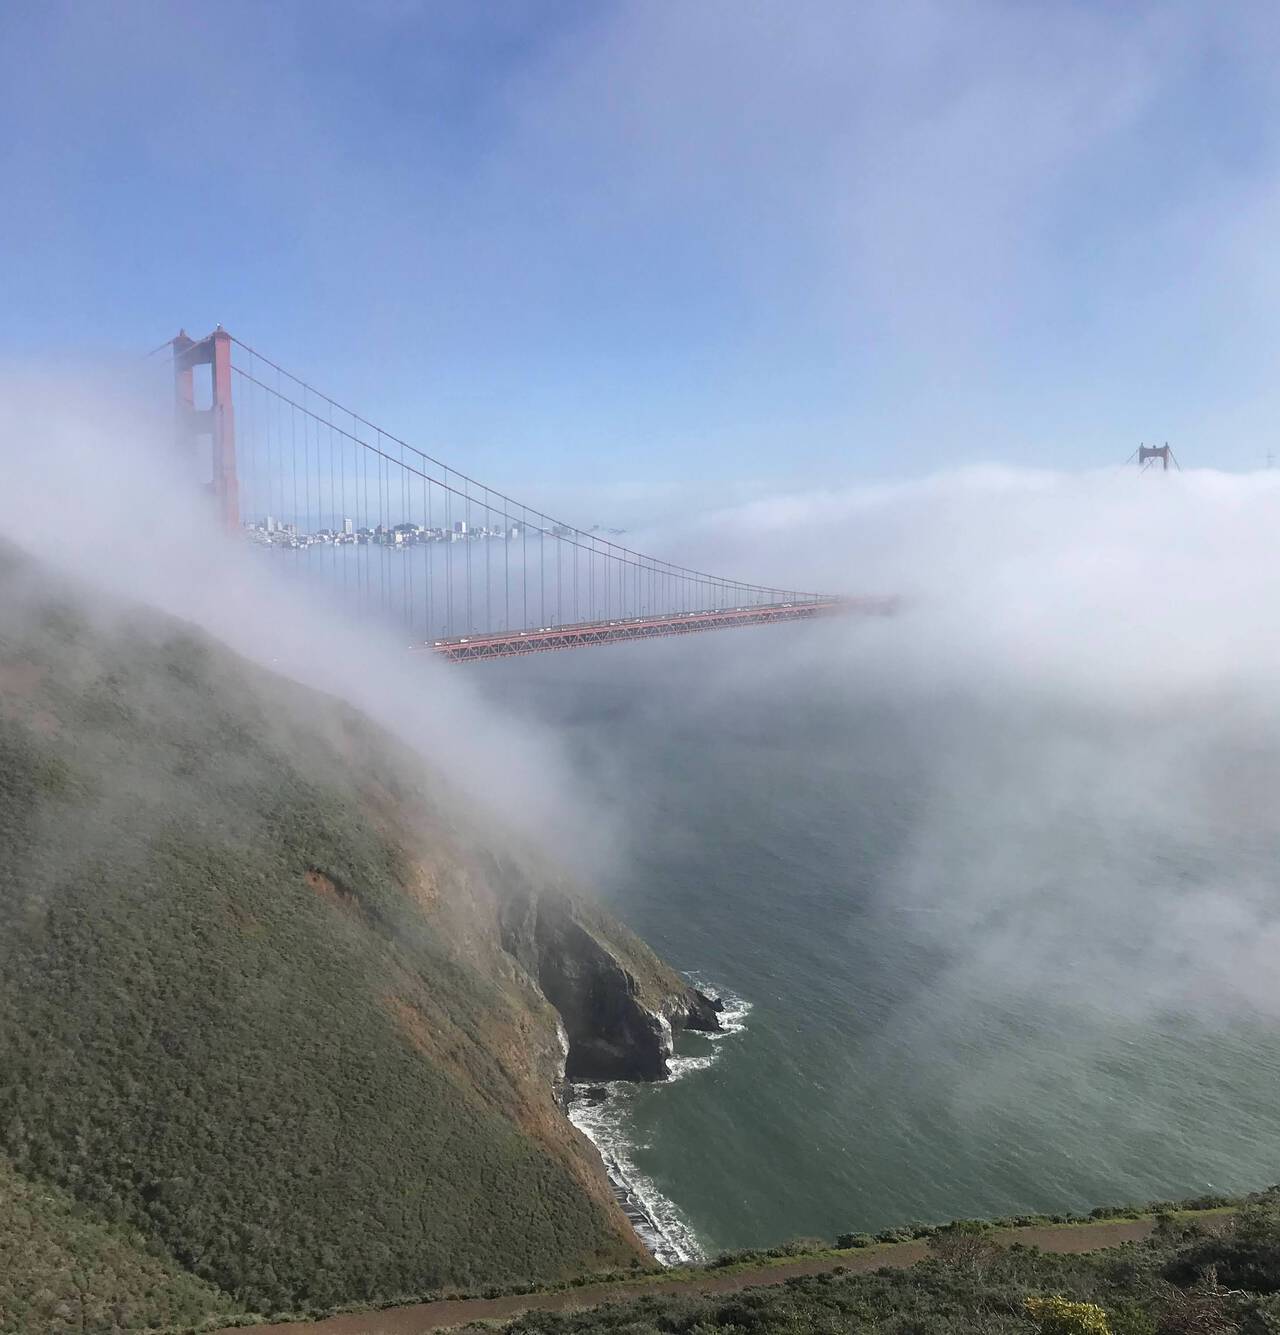 Fog obcures the majority of the Golden Gate Bridge with the ocean visible far below